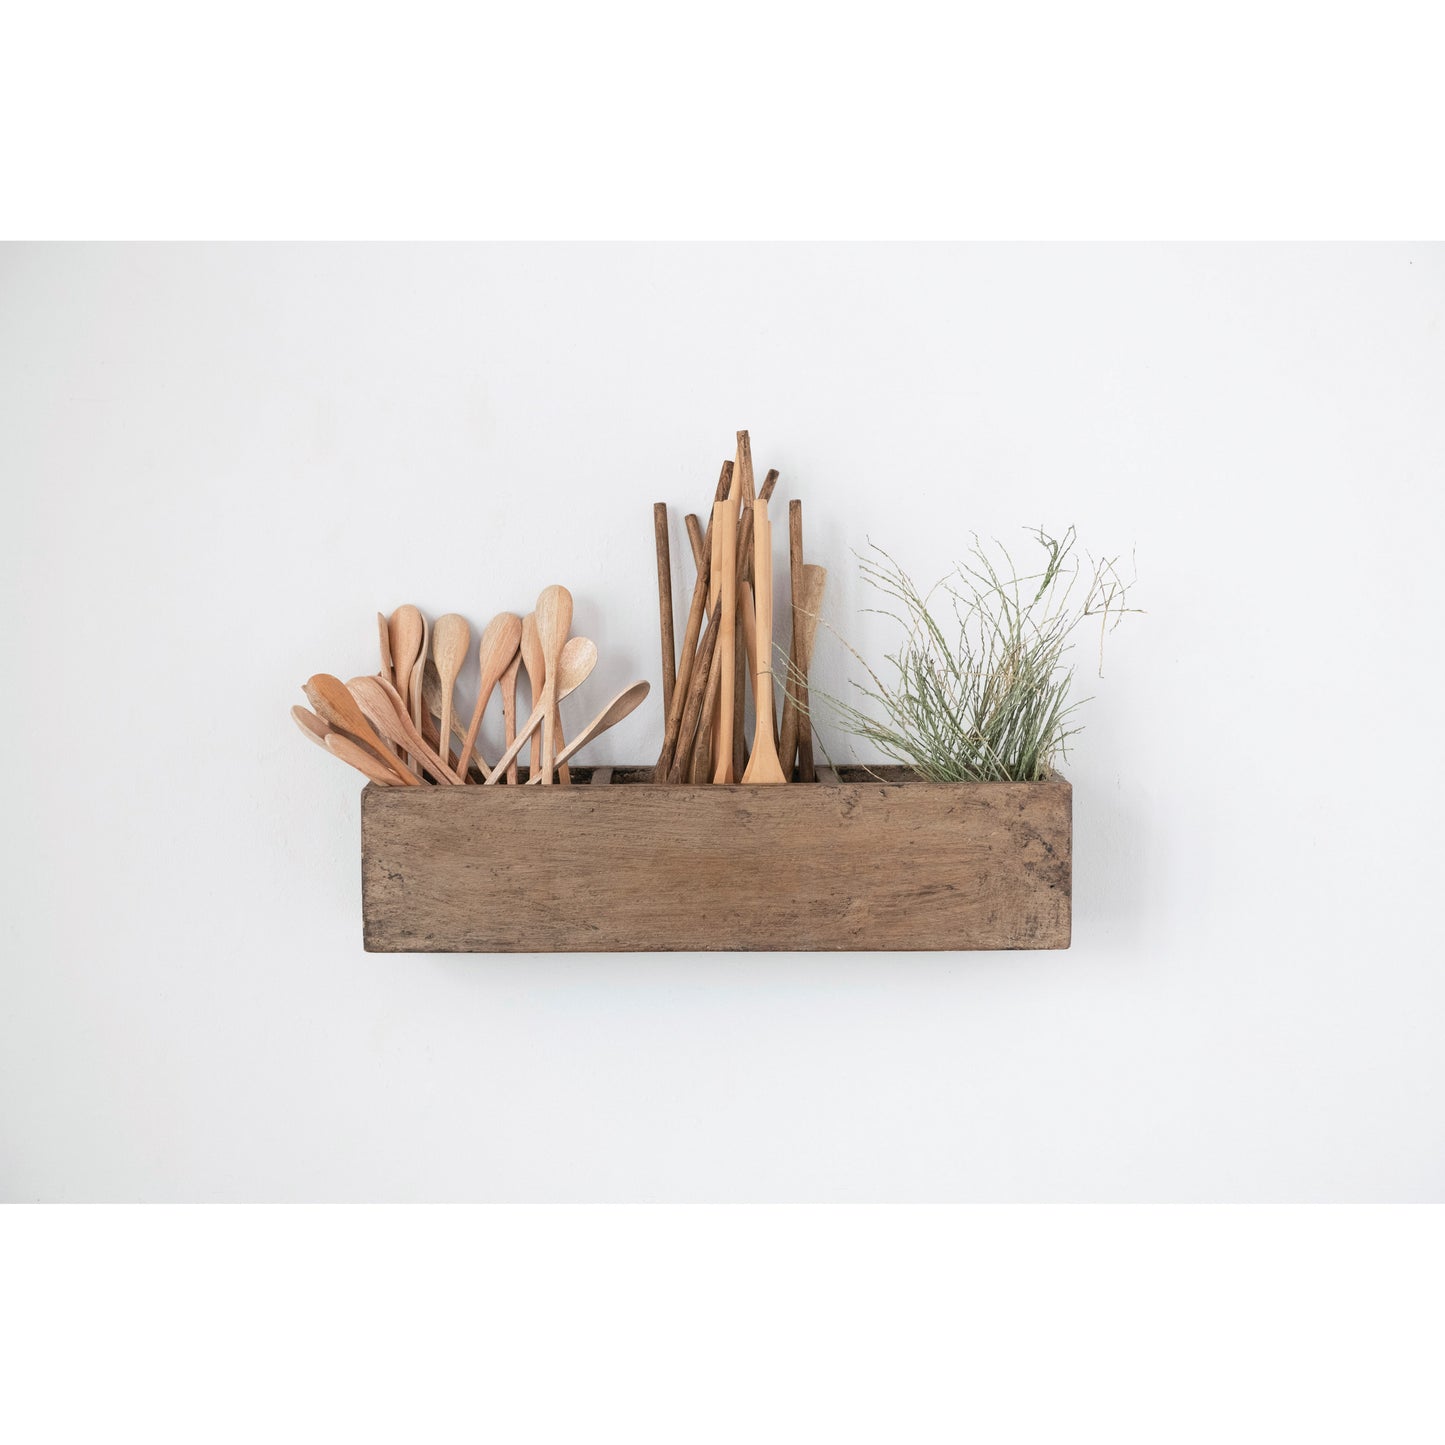 Rustic Wood Shelf with Containers